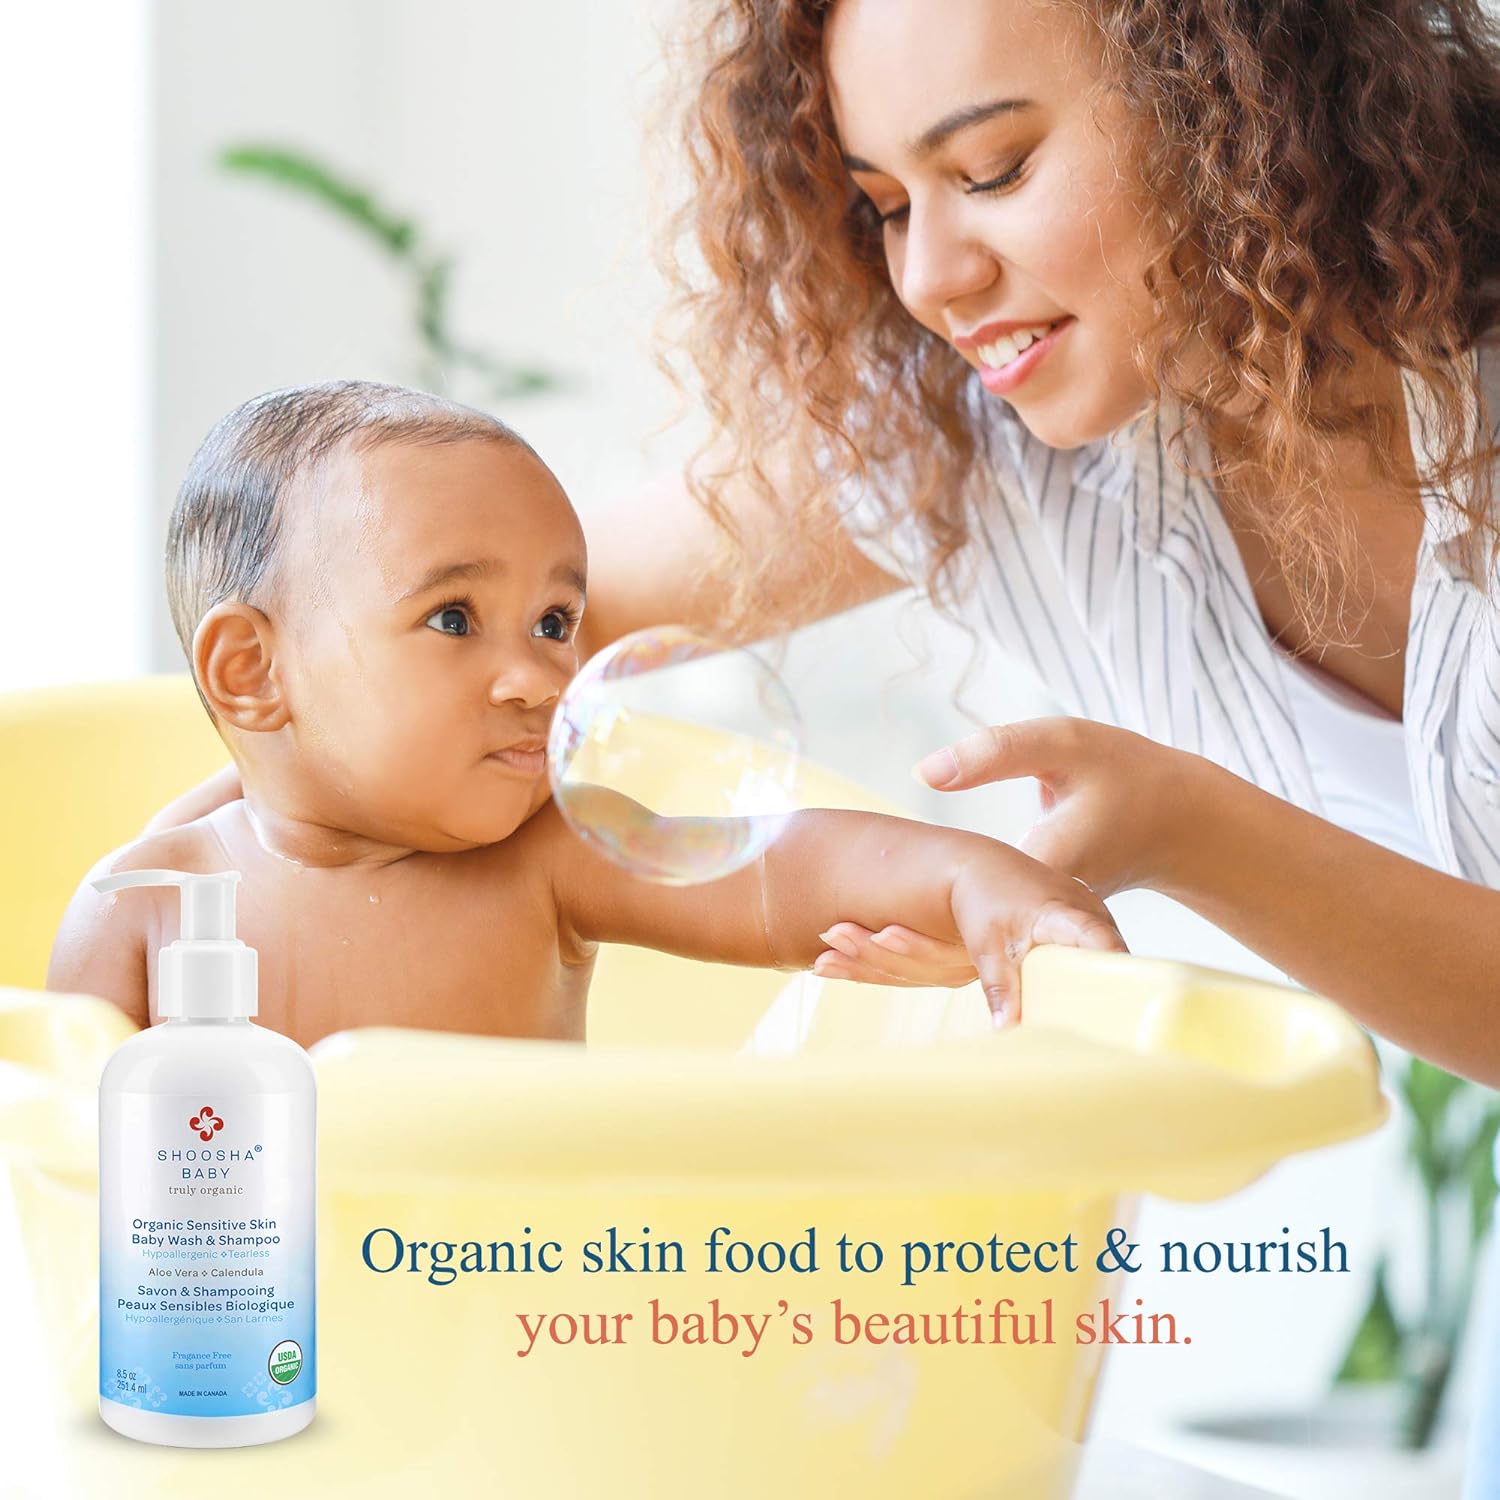 Shoosha USDA certified Organic Shampoo and Body Wash for babies and kids, Great for Sensitive Skin, All natural made from food grade ingredients, Fragrance and Tear Free, Hypoallergenic - Clarissa Maxwell 